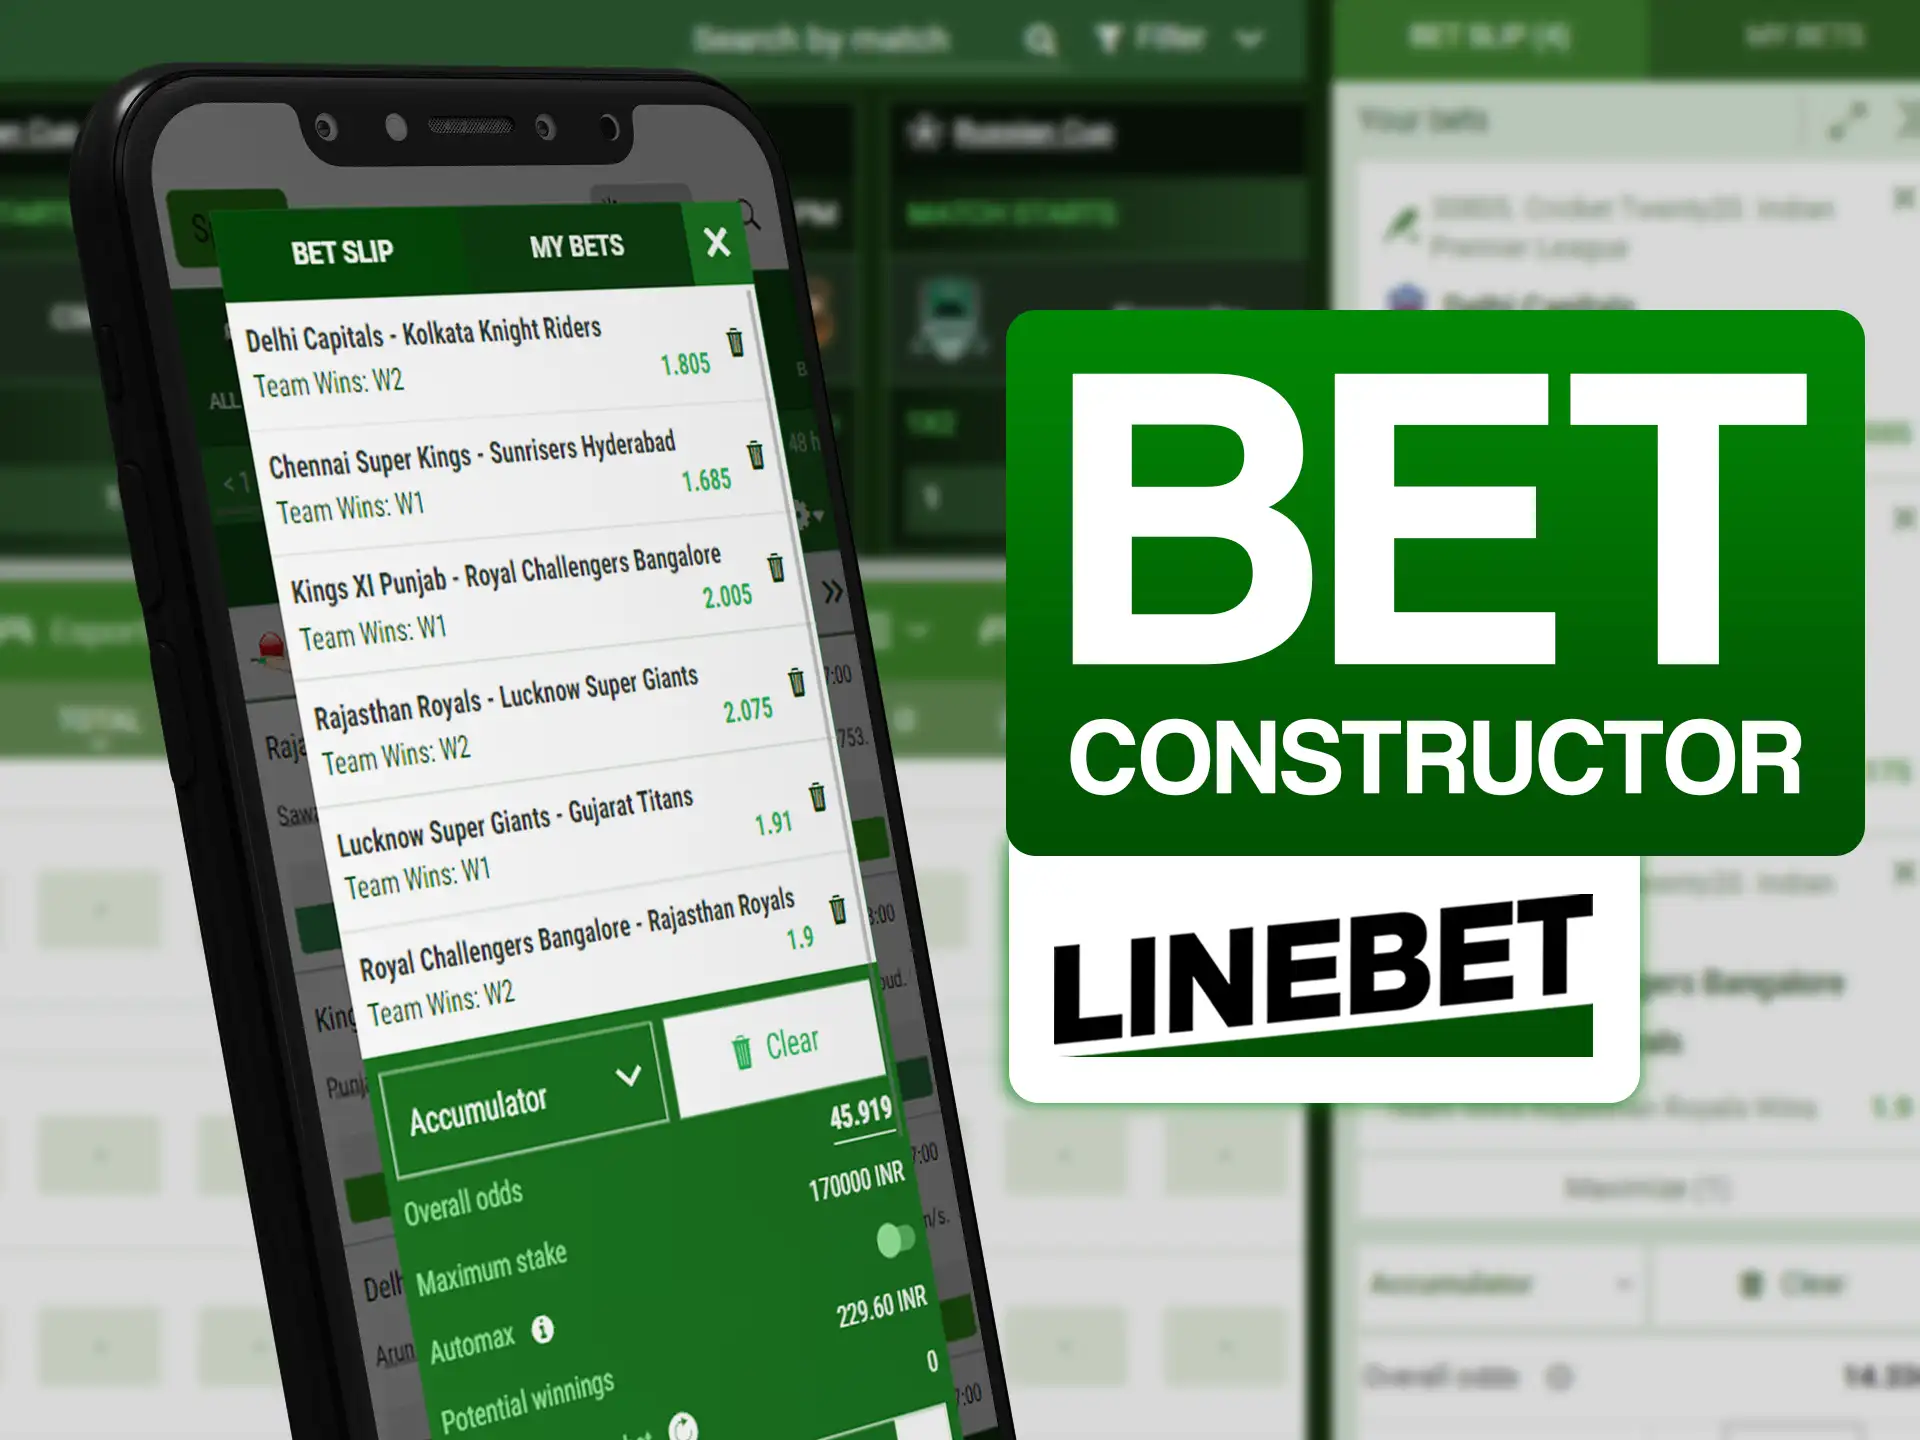 Make your own bet with Linebet bet constructor.